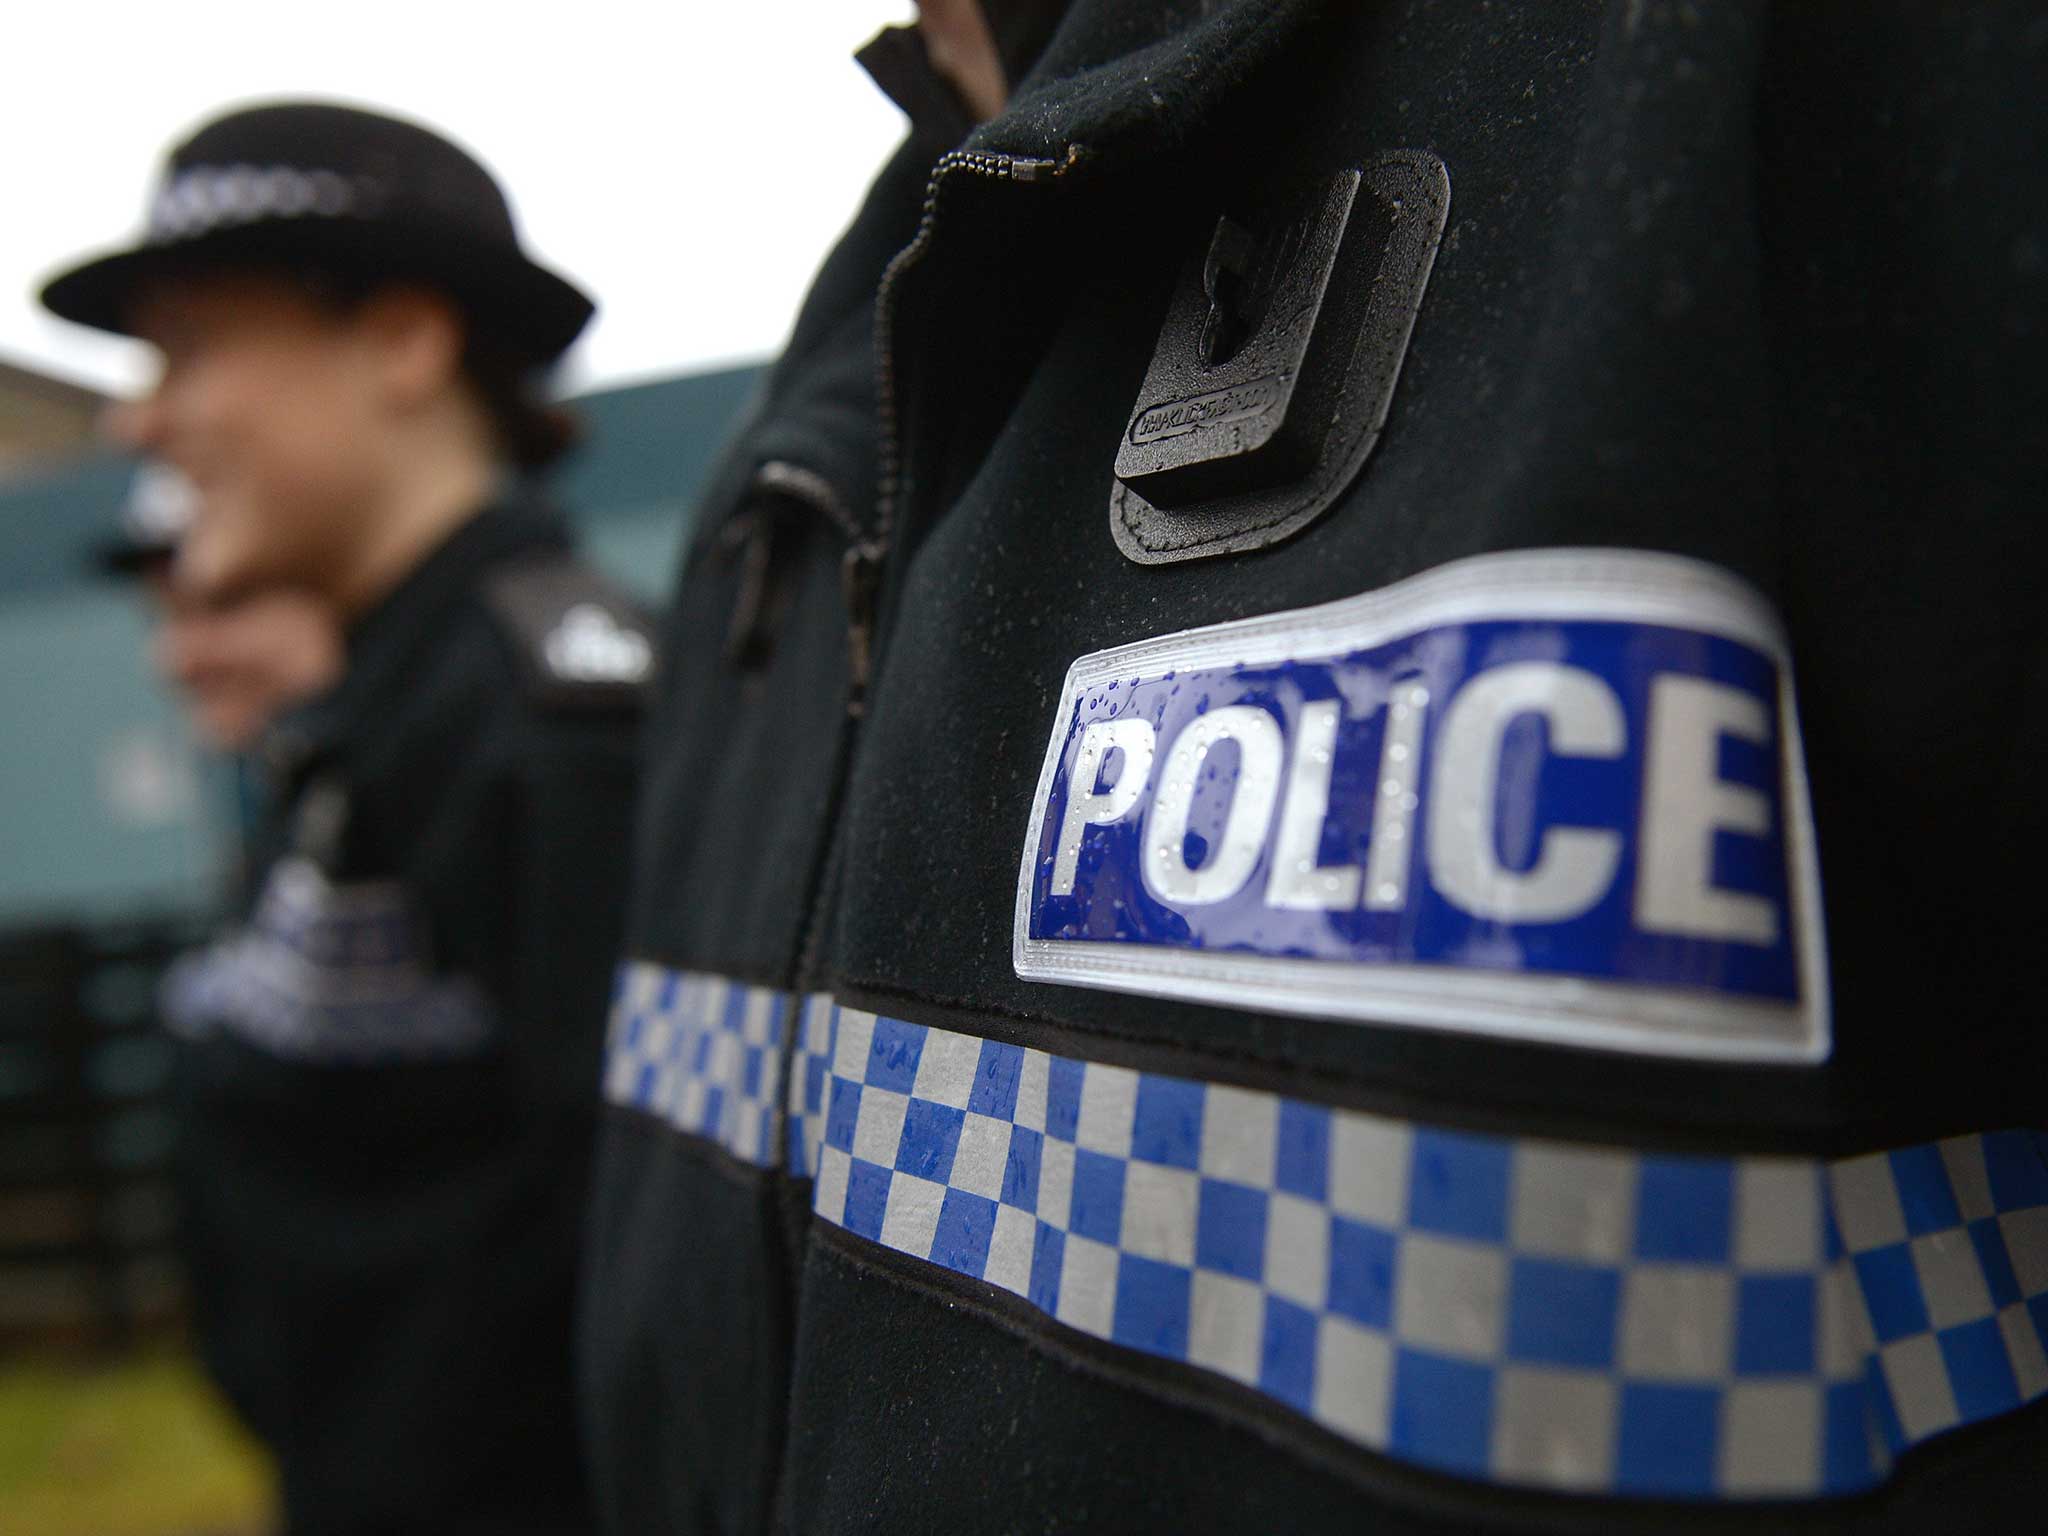 Crime recorded by police has increased by 13 per cent in England and Wales